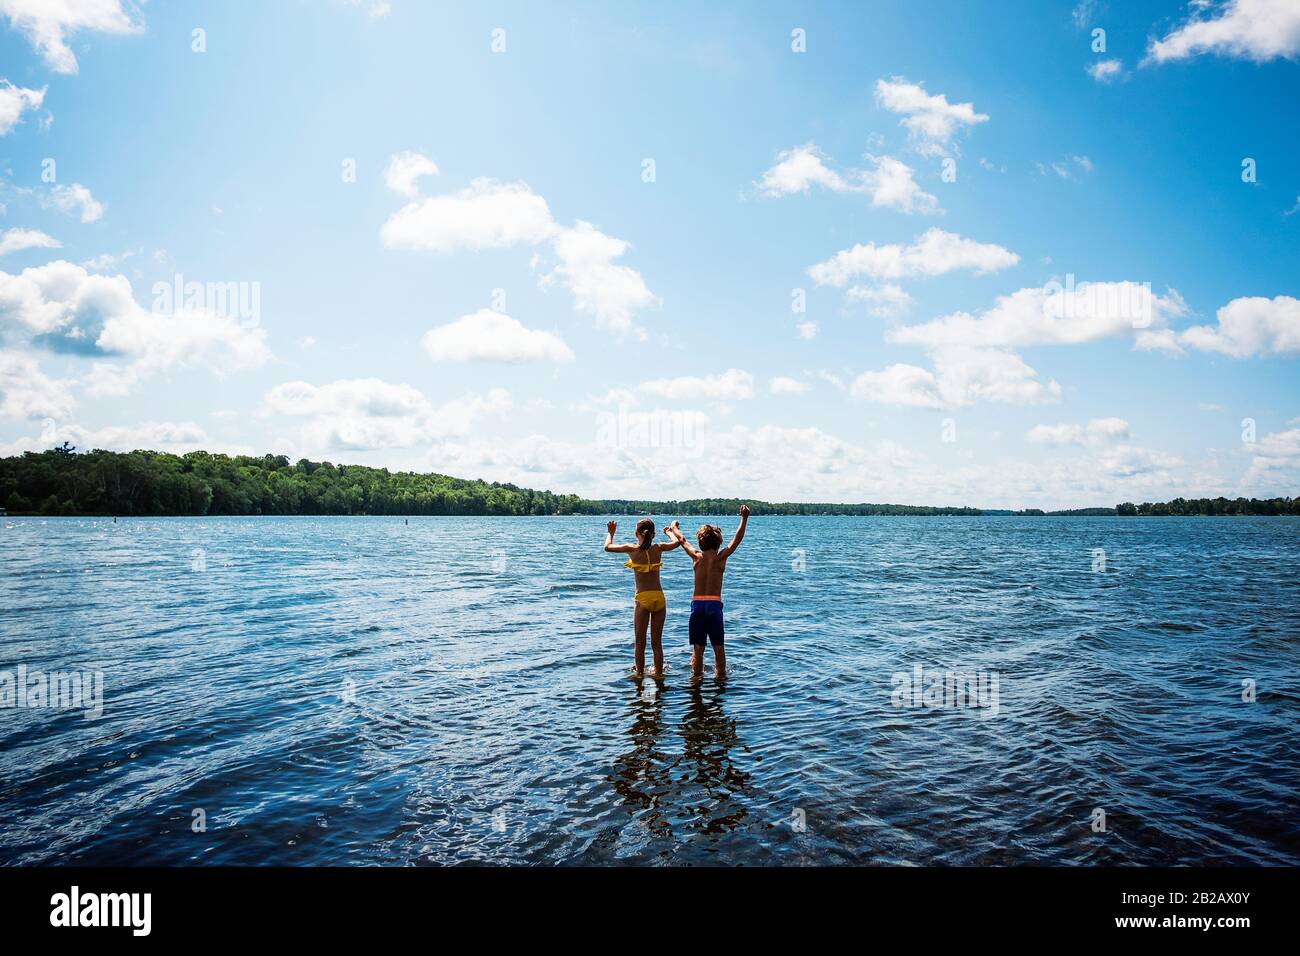 Rear view of two children standing in a lake with their arms raised, USA Stock Photo